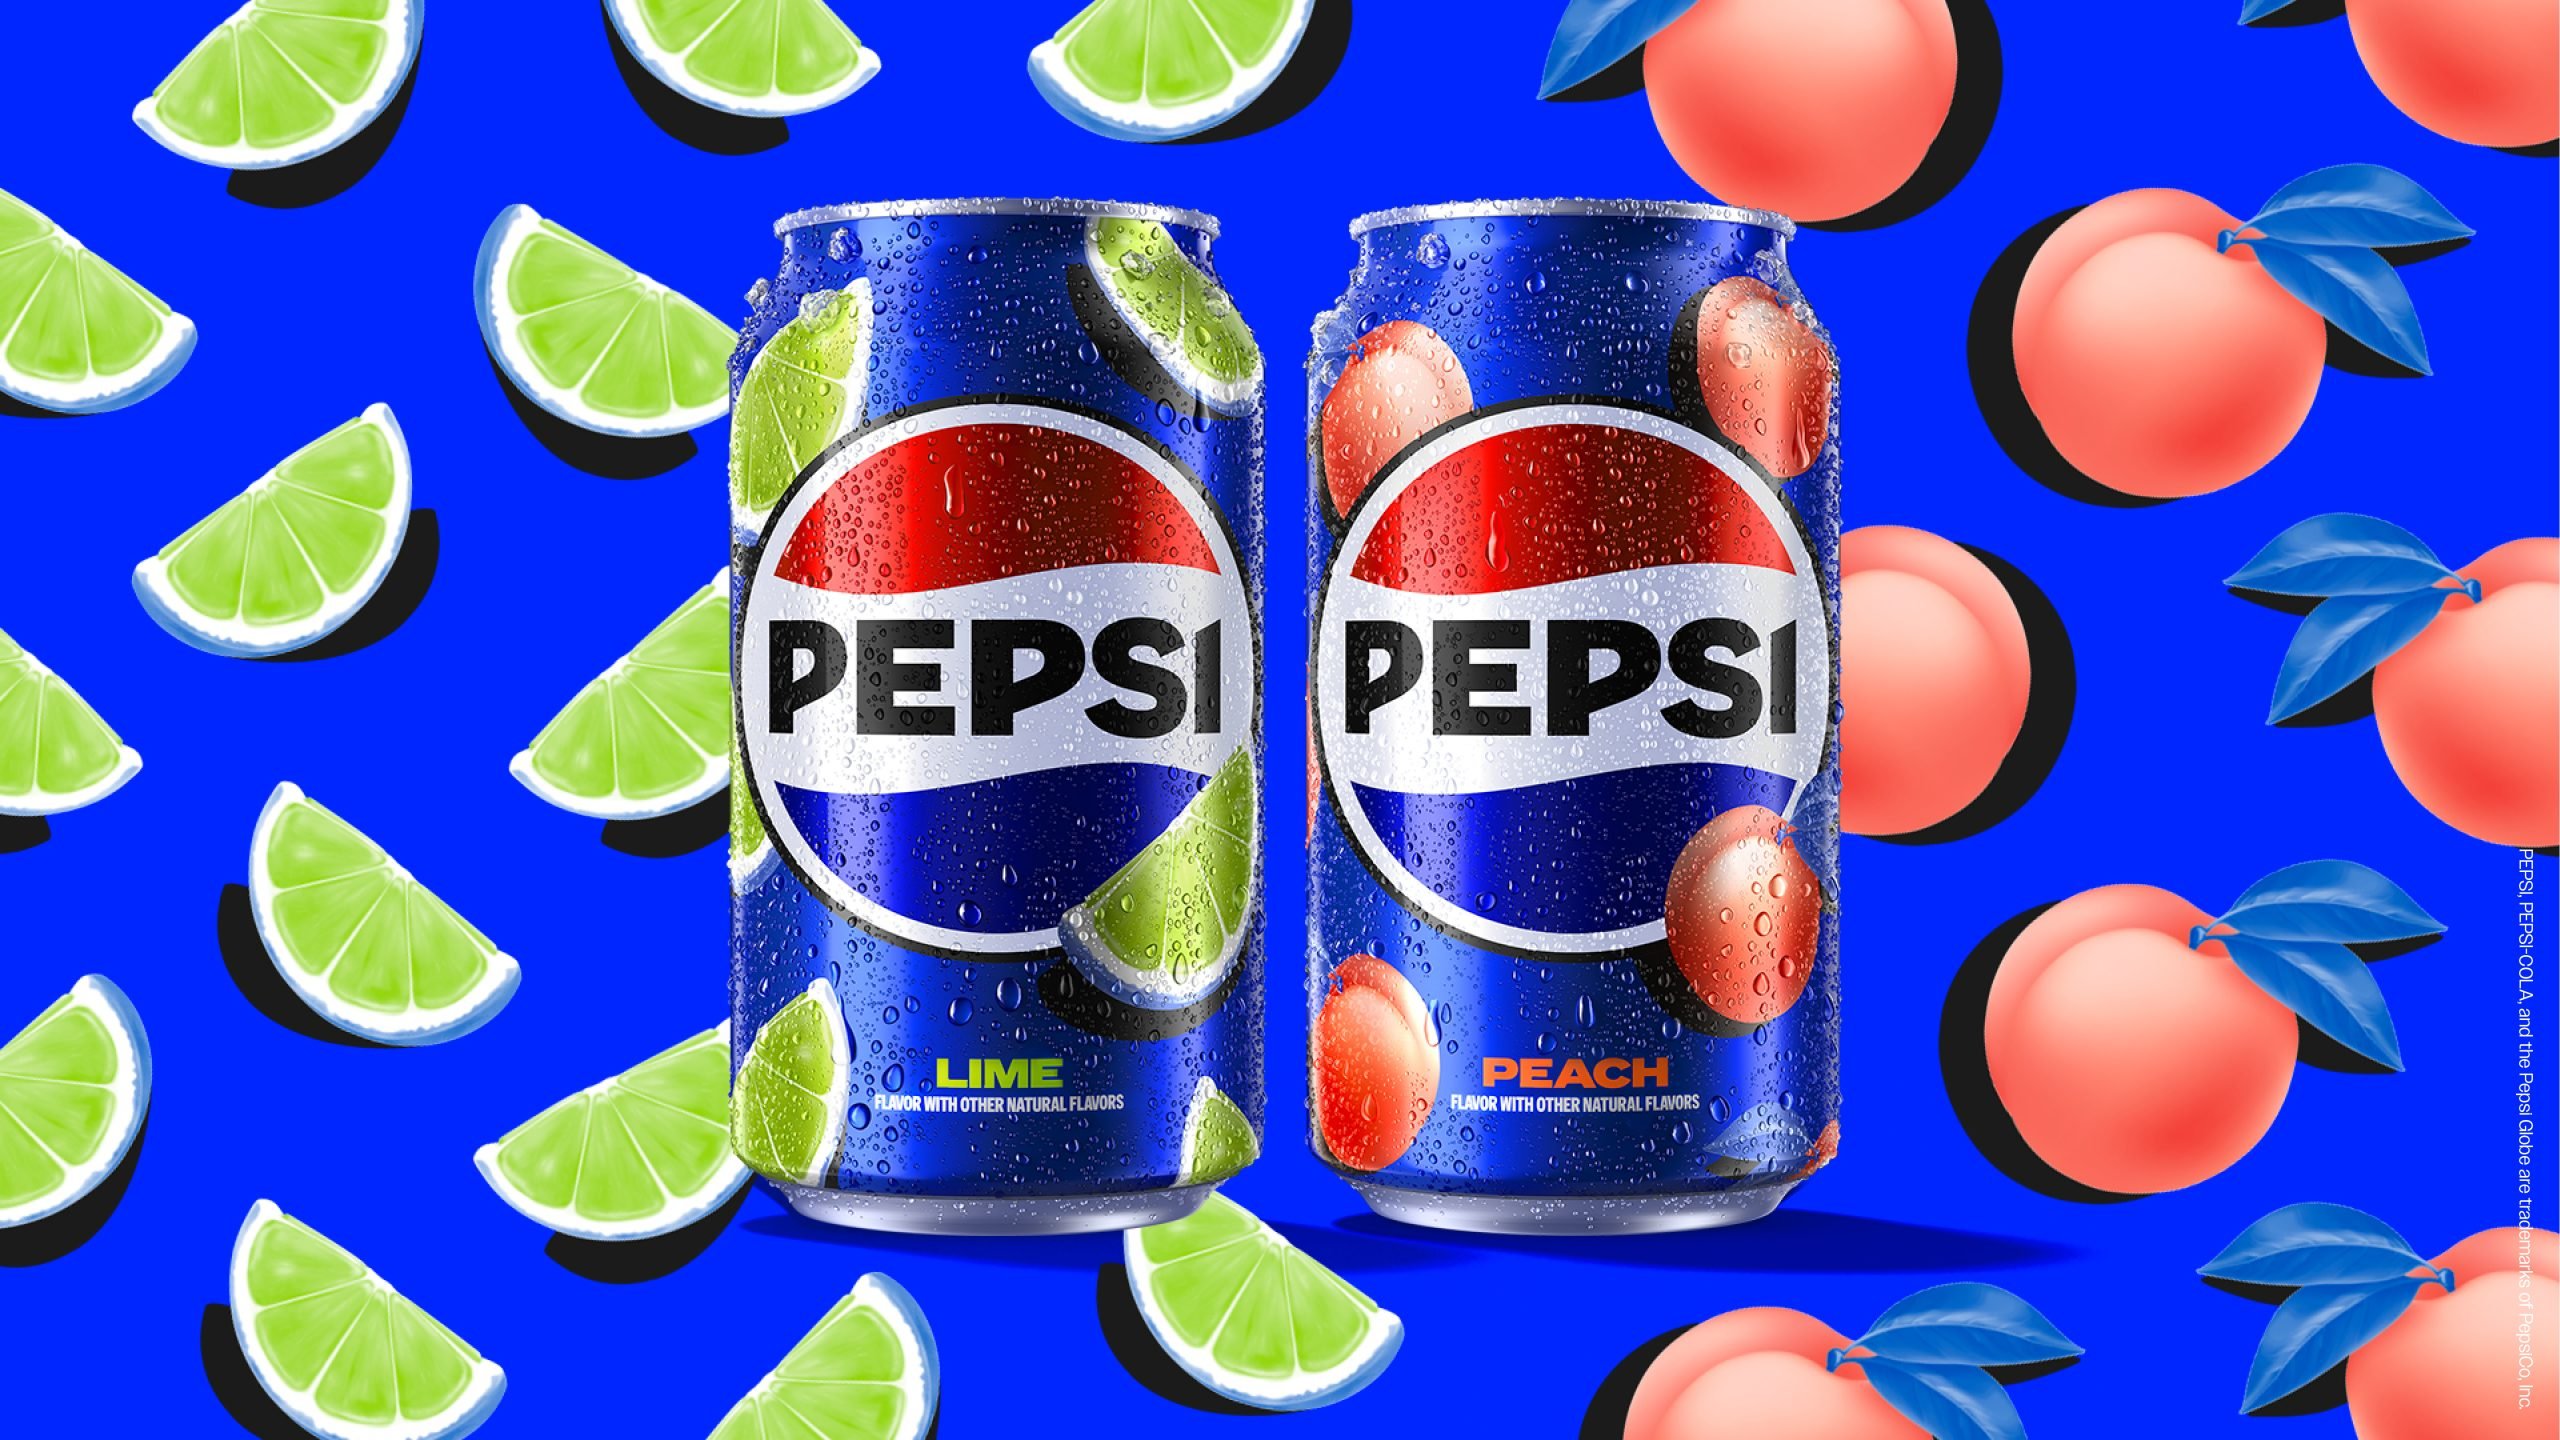 Pepsi Announces Limited Edition Peach and Lime Flavors